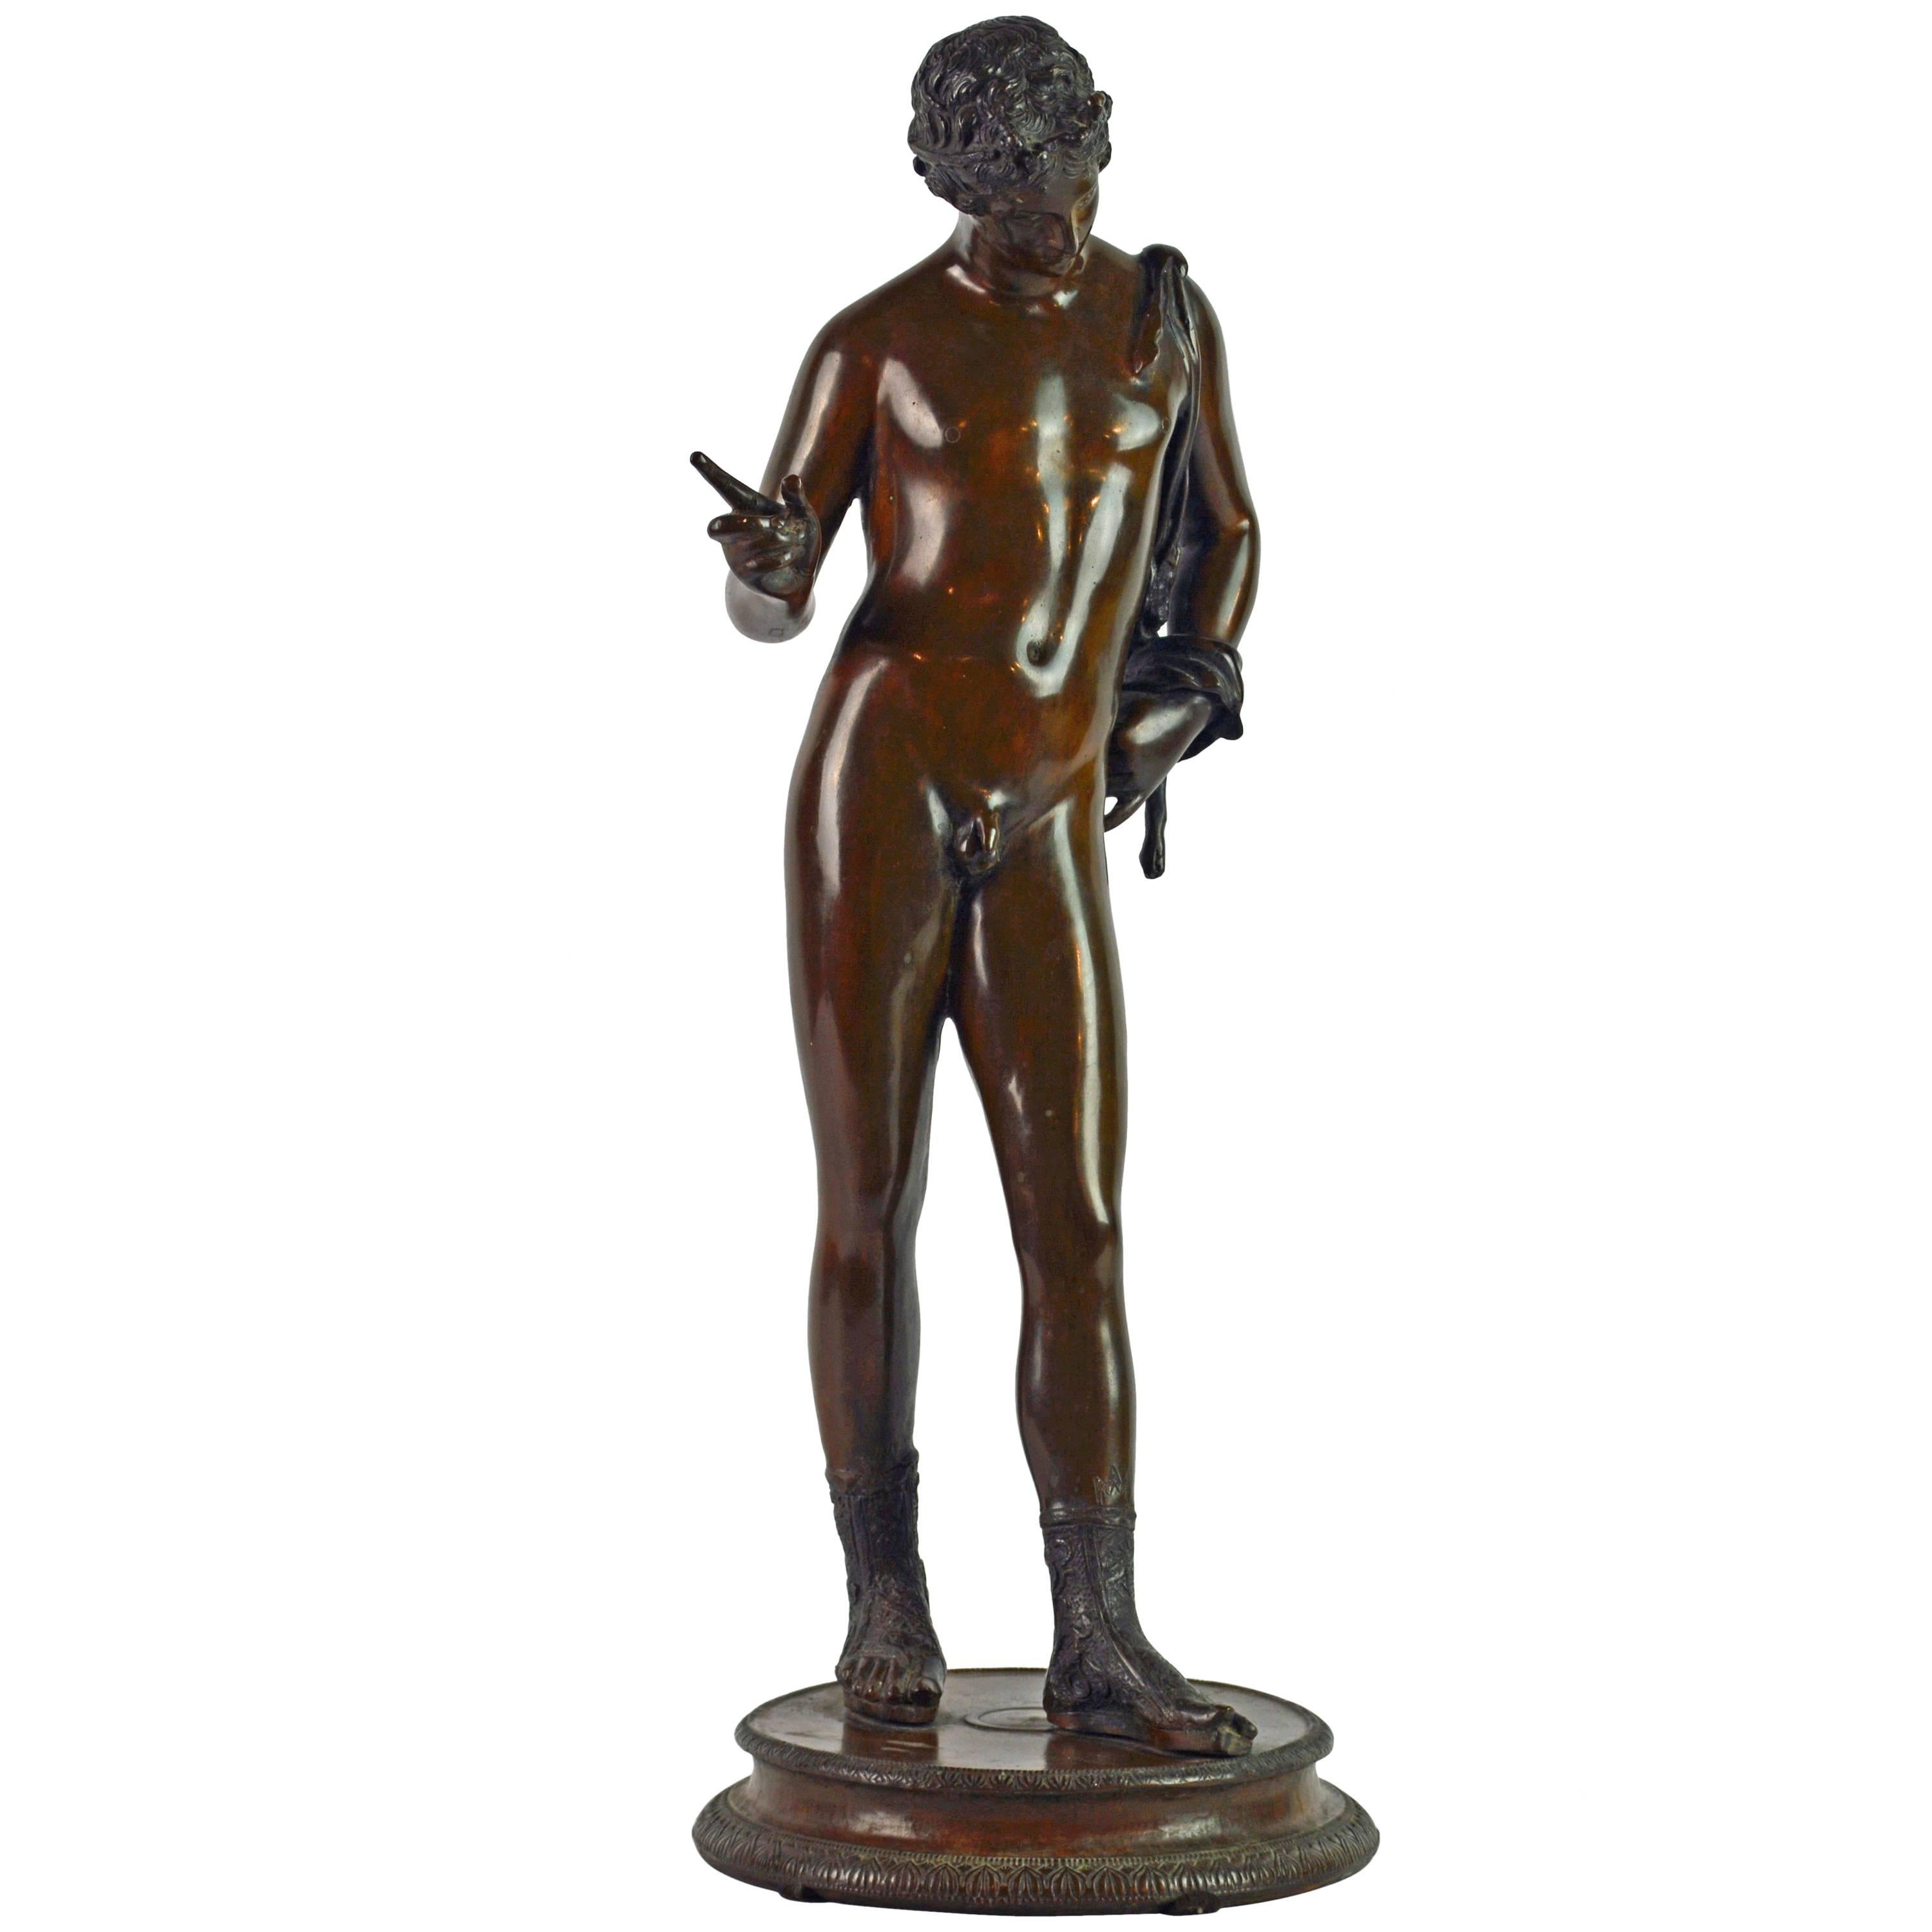 Italian 19th Century Bronze Statue of Antinous with Goatskin after the Antique